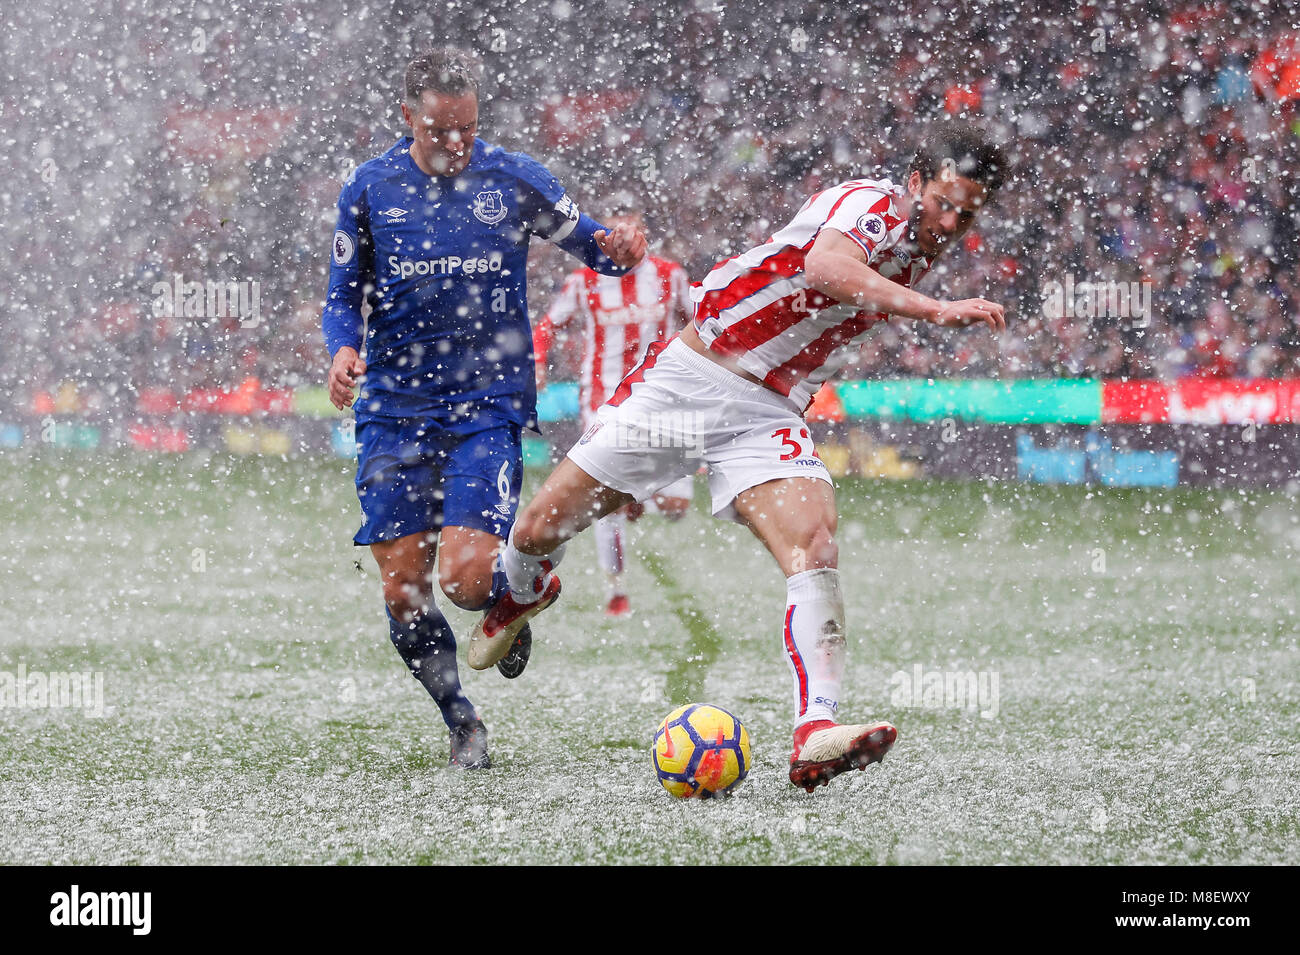 Stoke-on-Trent, UK, 17 Mar 2018. Phil Jagielka of Everton and Ramadan Sobhi of Stoke City compete for the ball during the Premier League match between Stoke City and Everton at Bet365 Stadium on March 17th 2018 in Stoke-on-Trent, England. (Photo by Daniel Chesterton/phcimages.com) Stock Photo